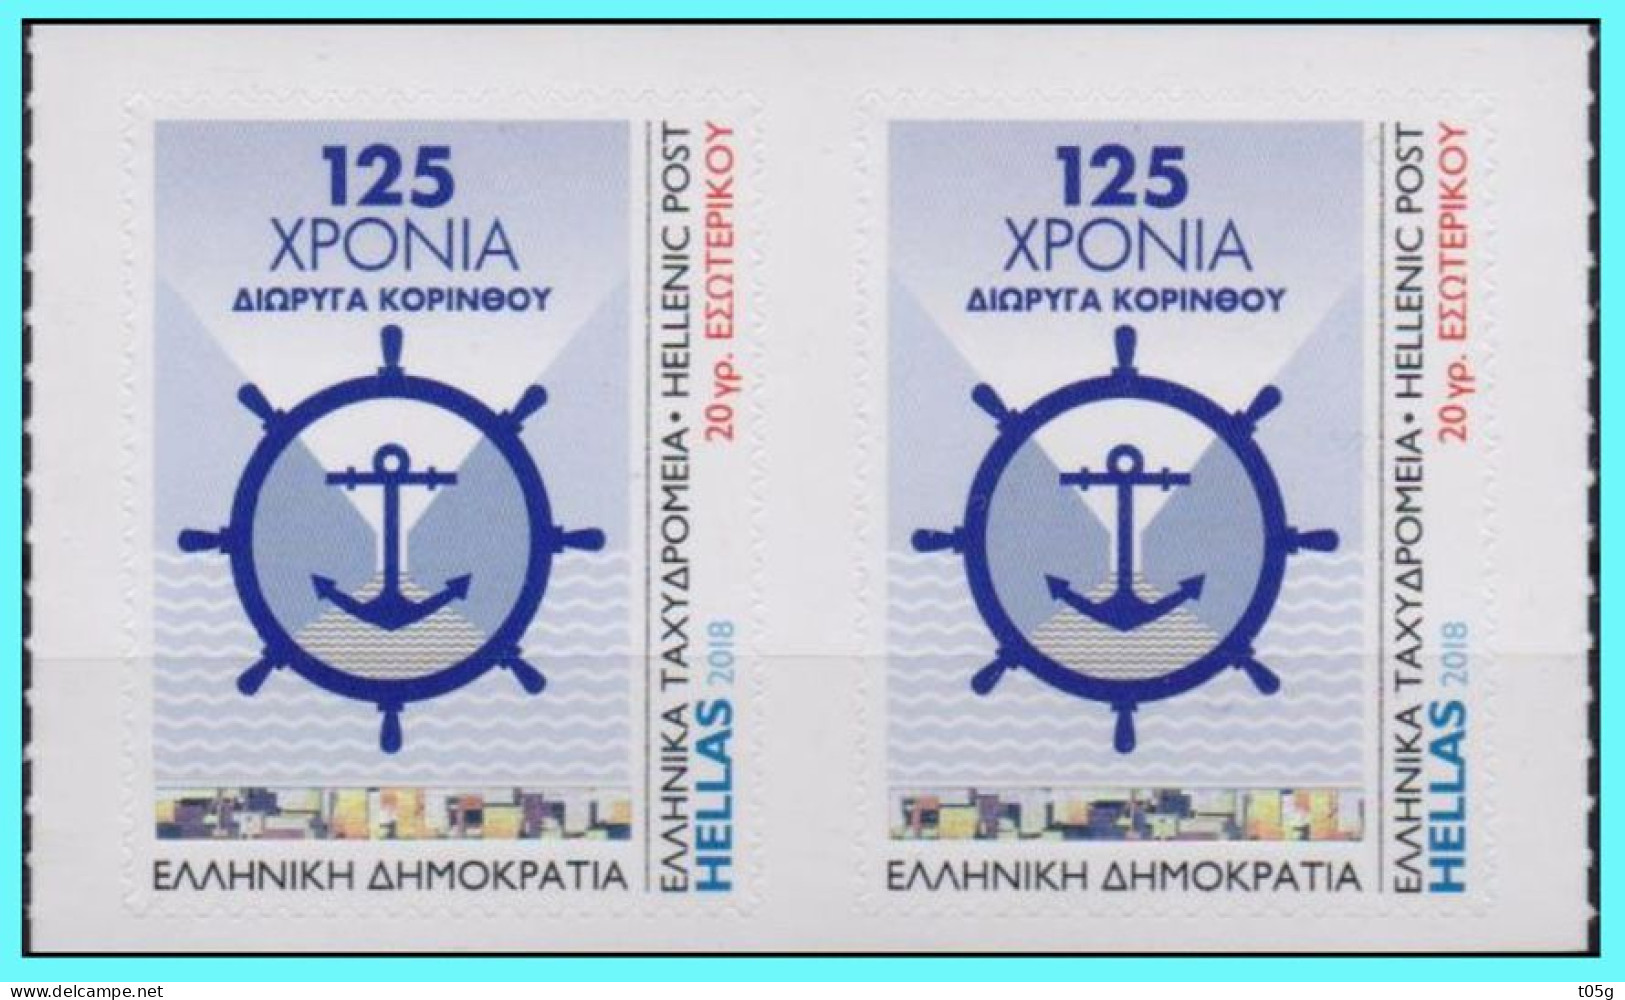 GREECE- GRECE  - HELLAS  2018: 125 YEARS OF THE KORINTH CANAL- Two Self-athesive Stamps From Booklet  MNH** - Neufs